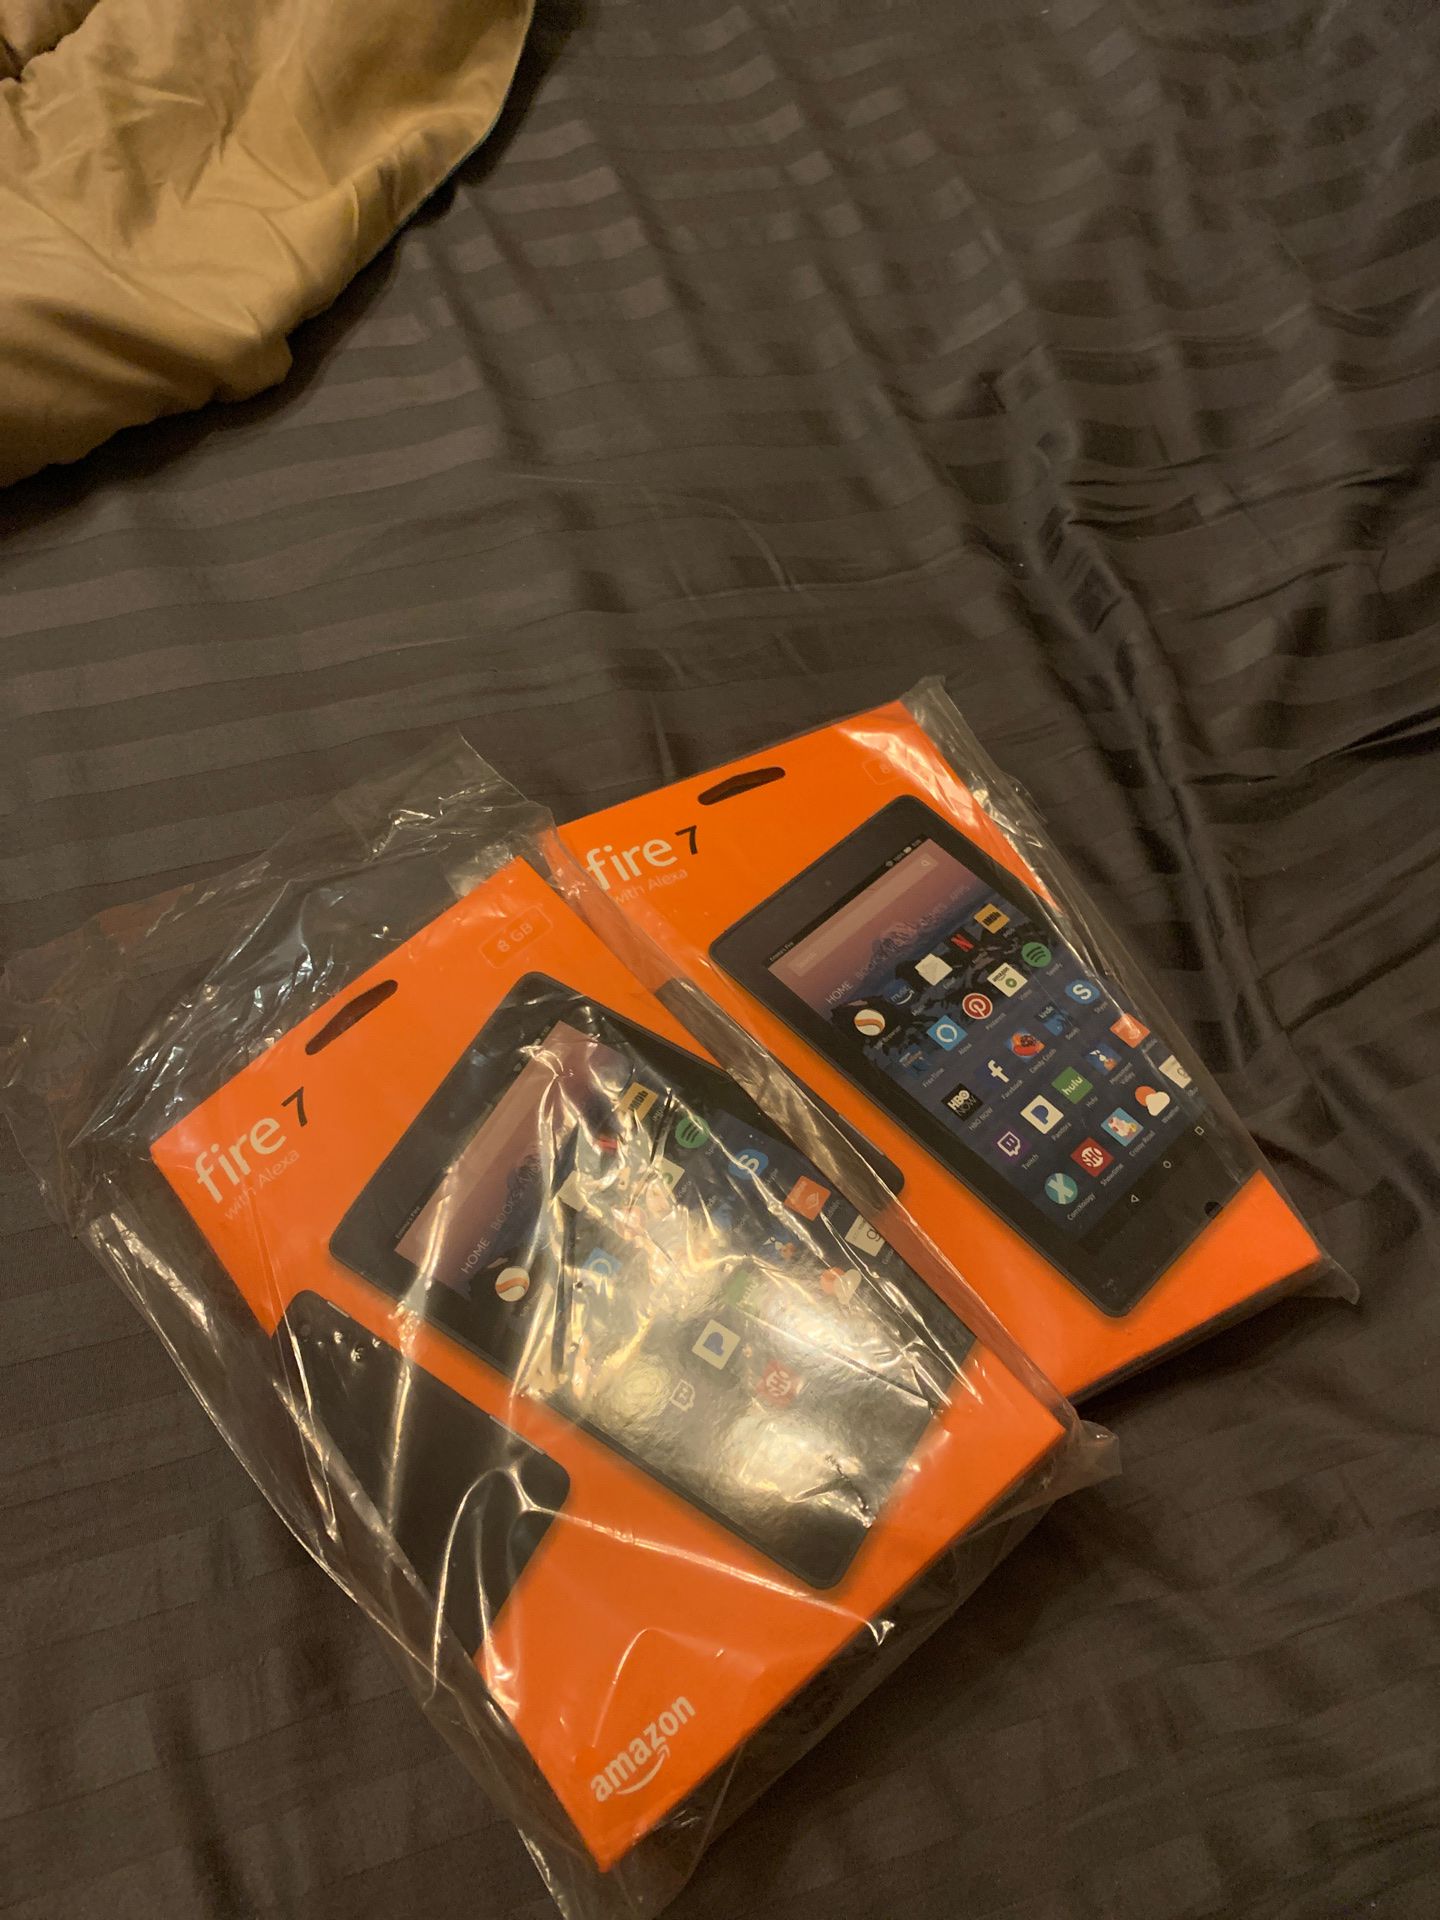 Brand new fire kindle 7